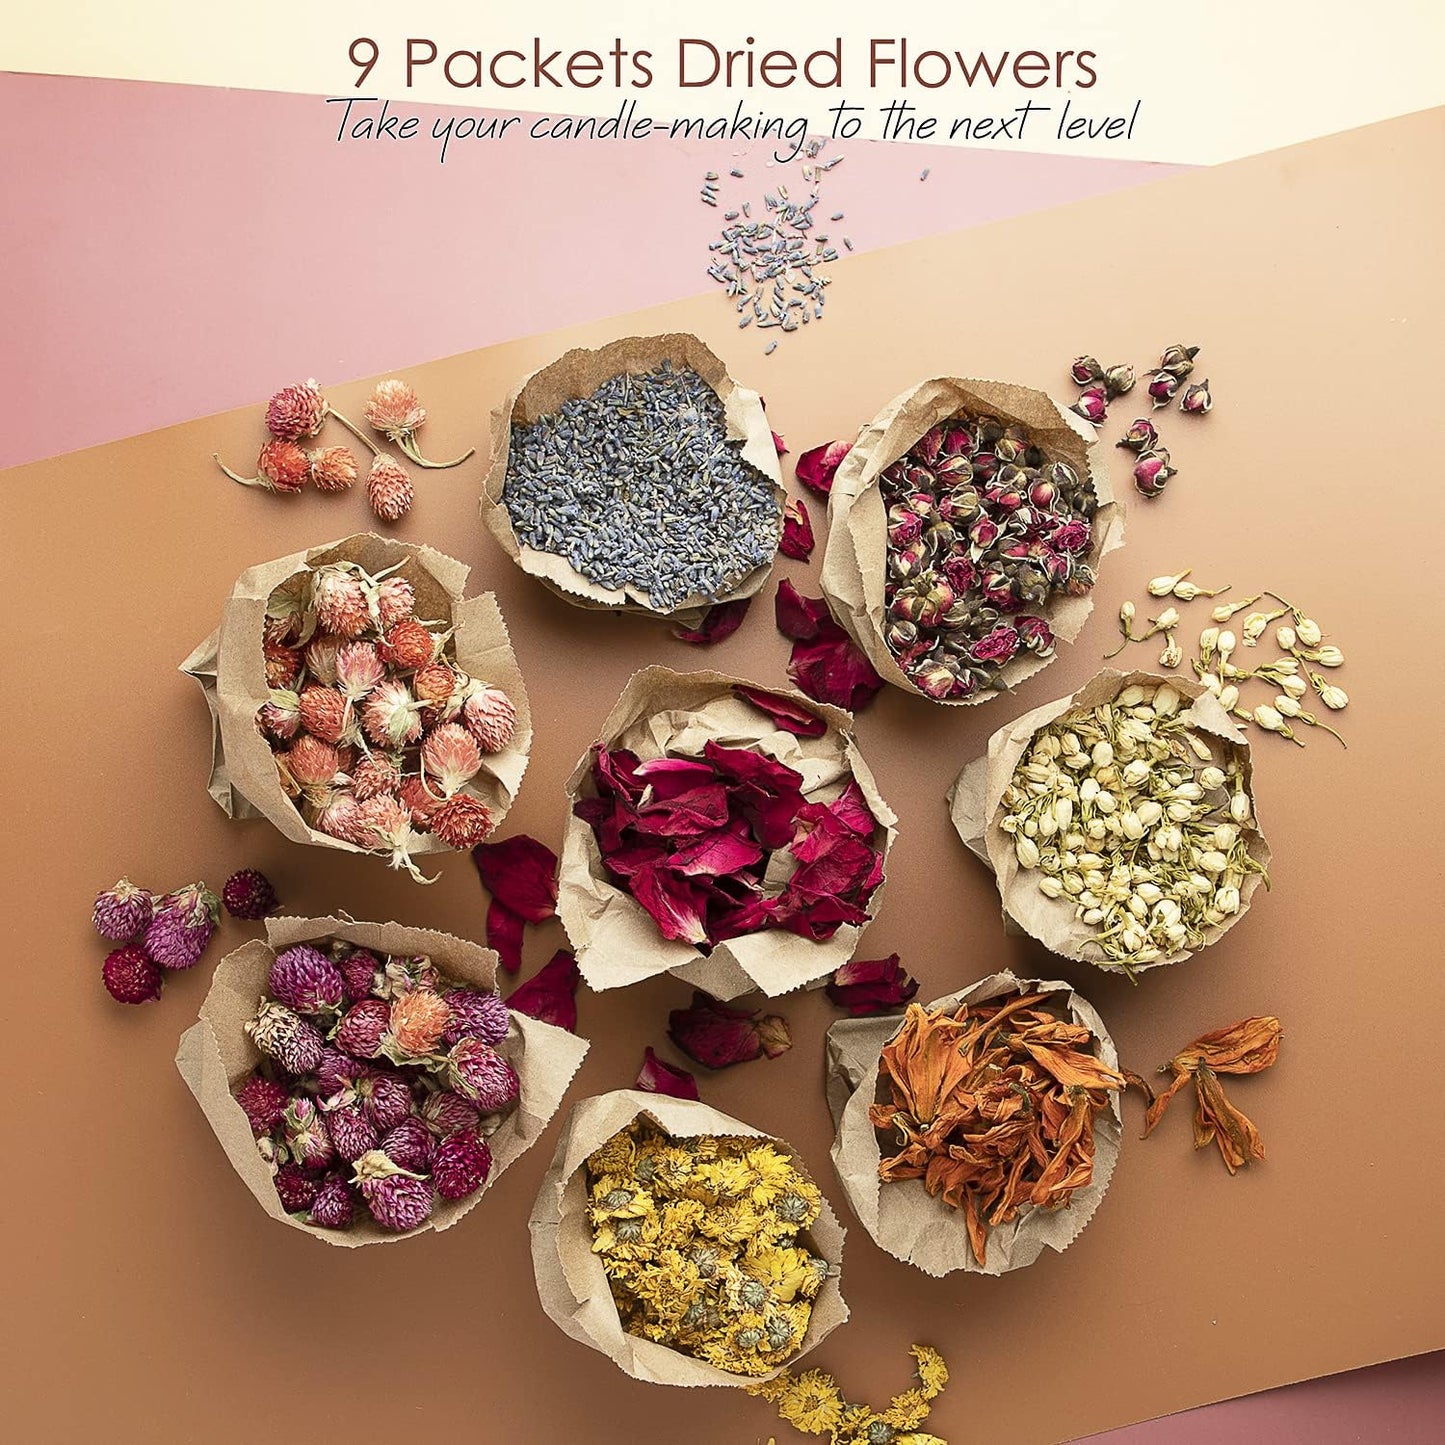 Soy Candle Making Kit + Dried Flowers - 2 Lbs